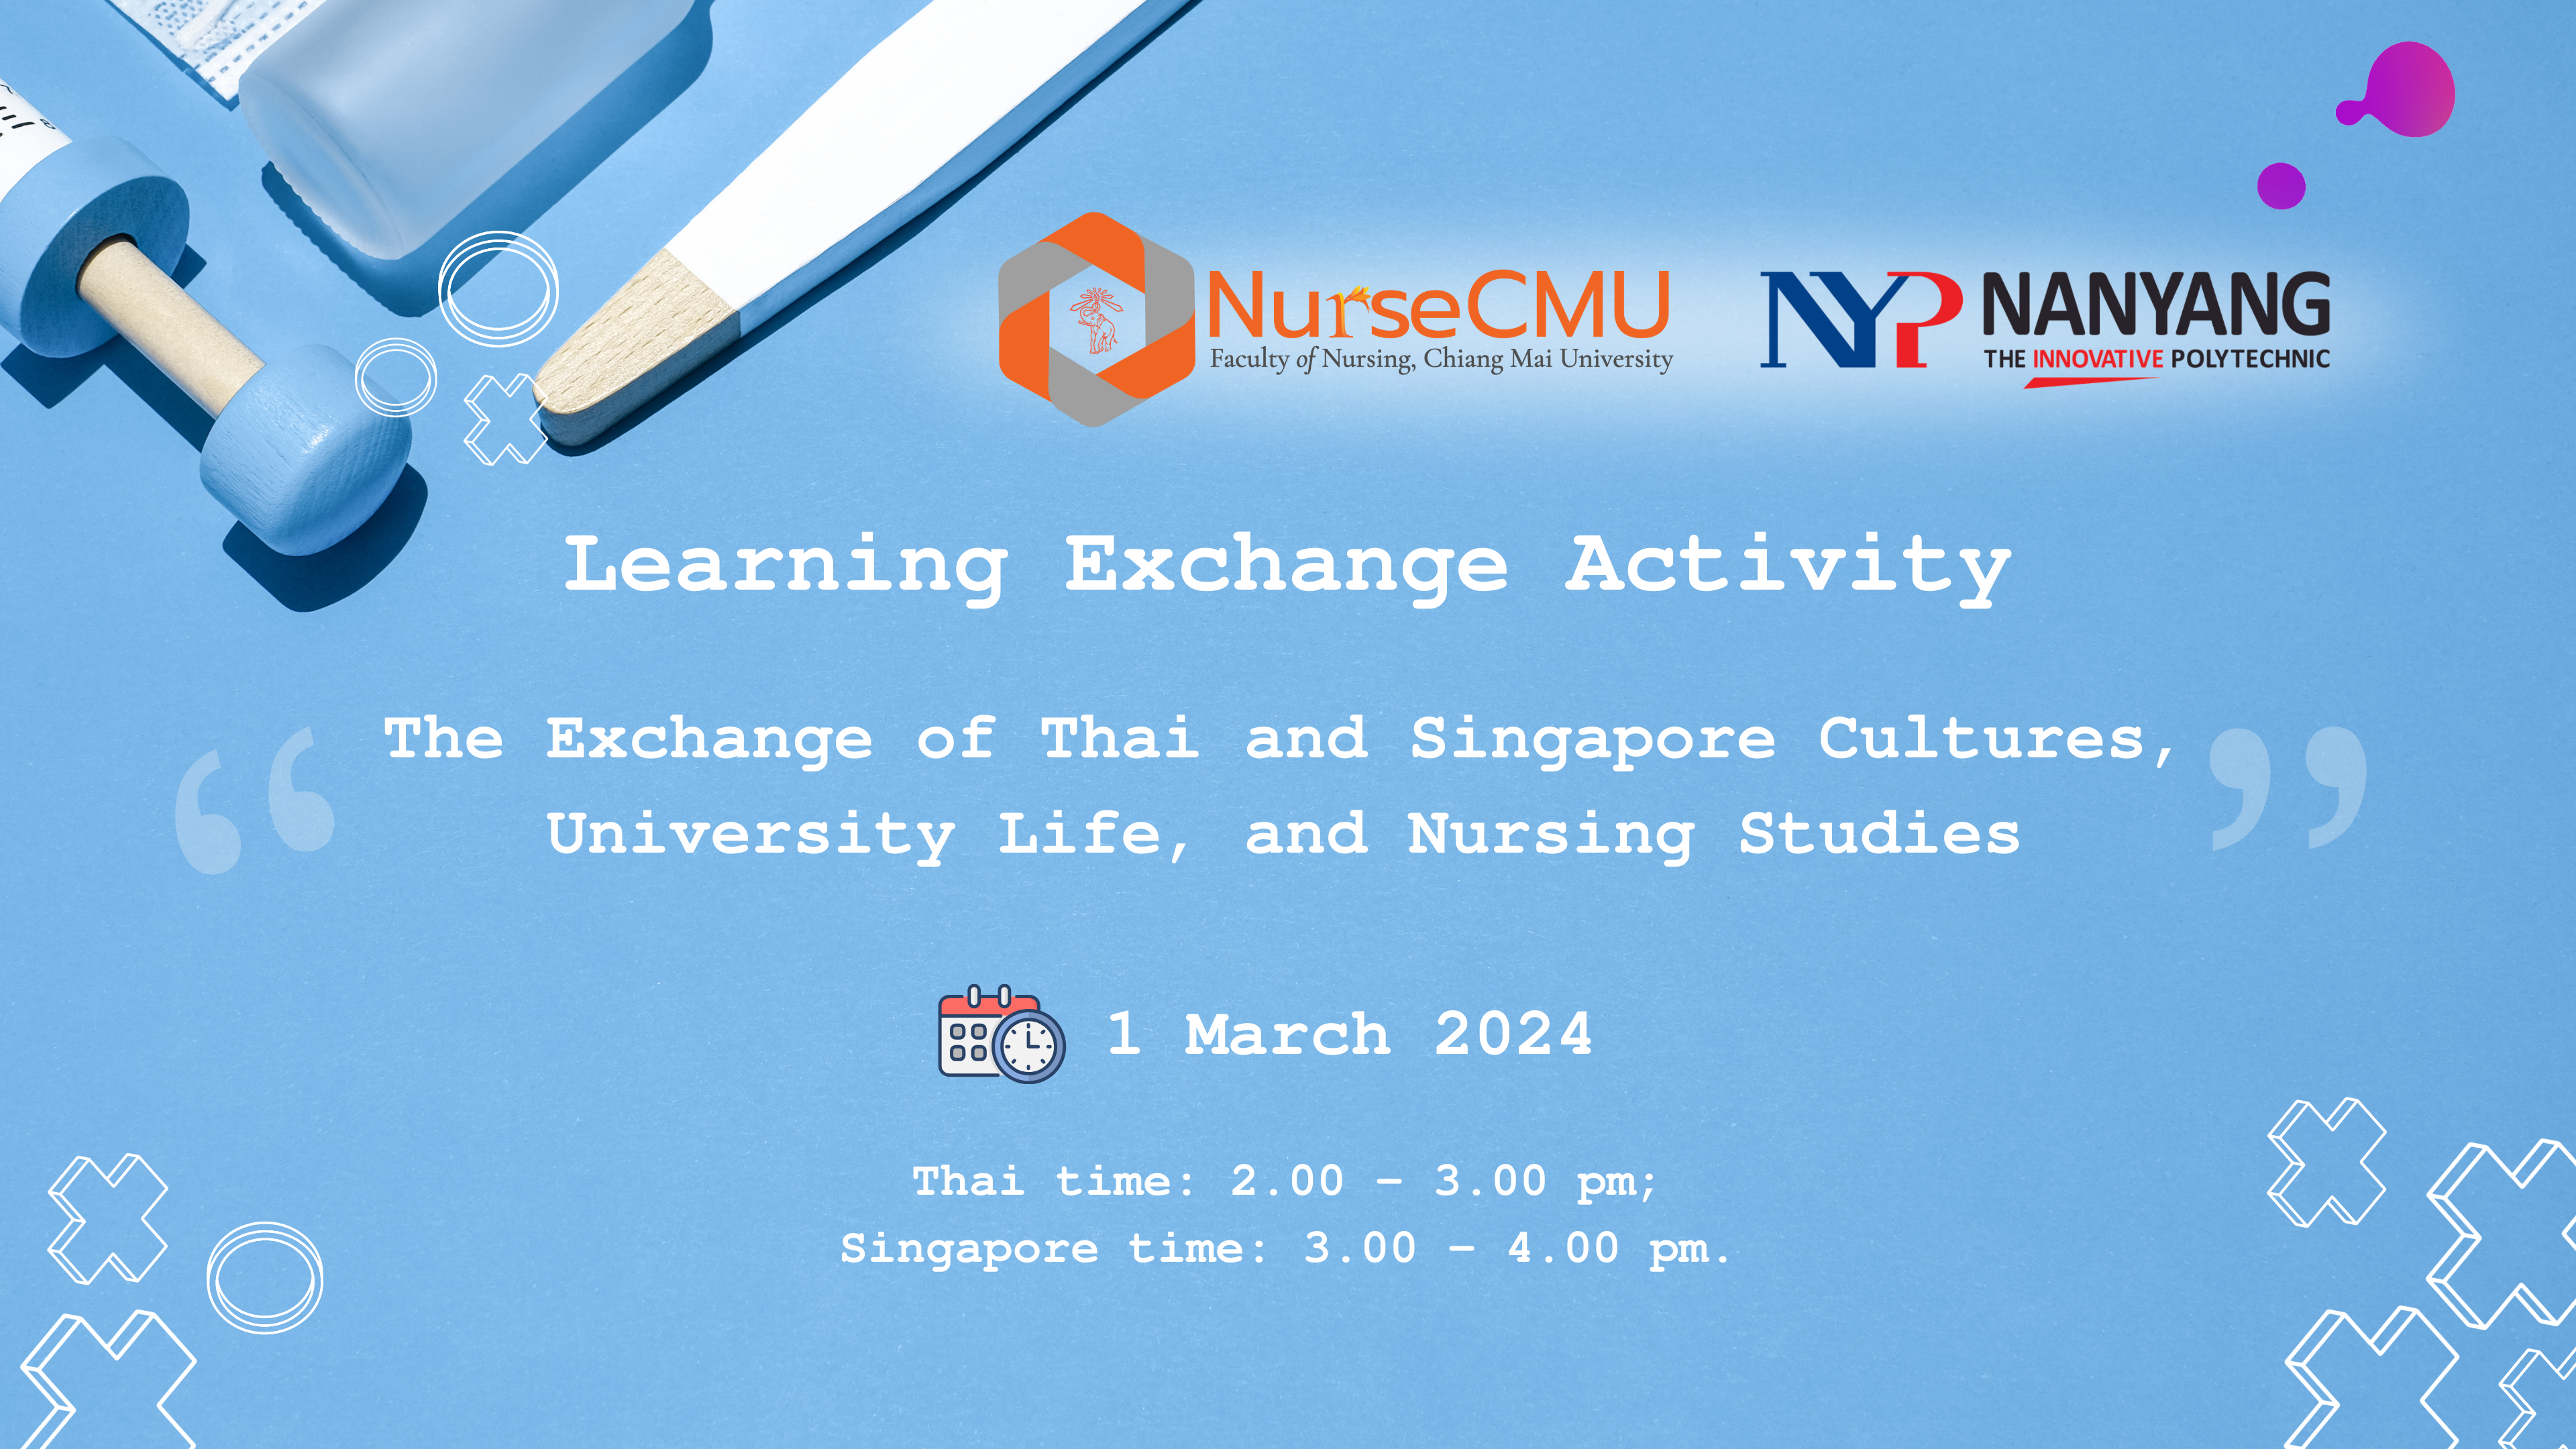 
	The Exchange of Thai and Singapore Cultures, University Life, and Nursing Studies
